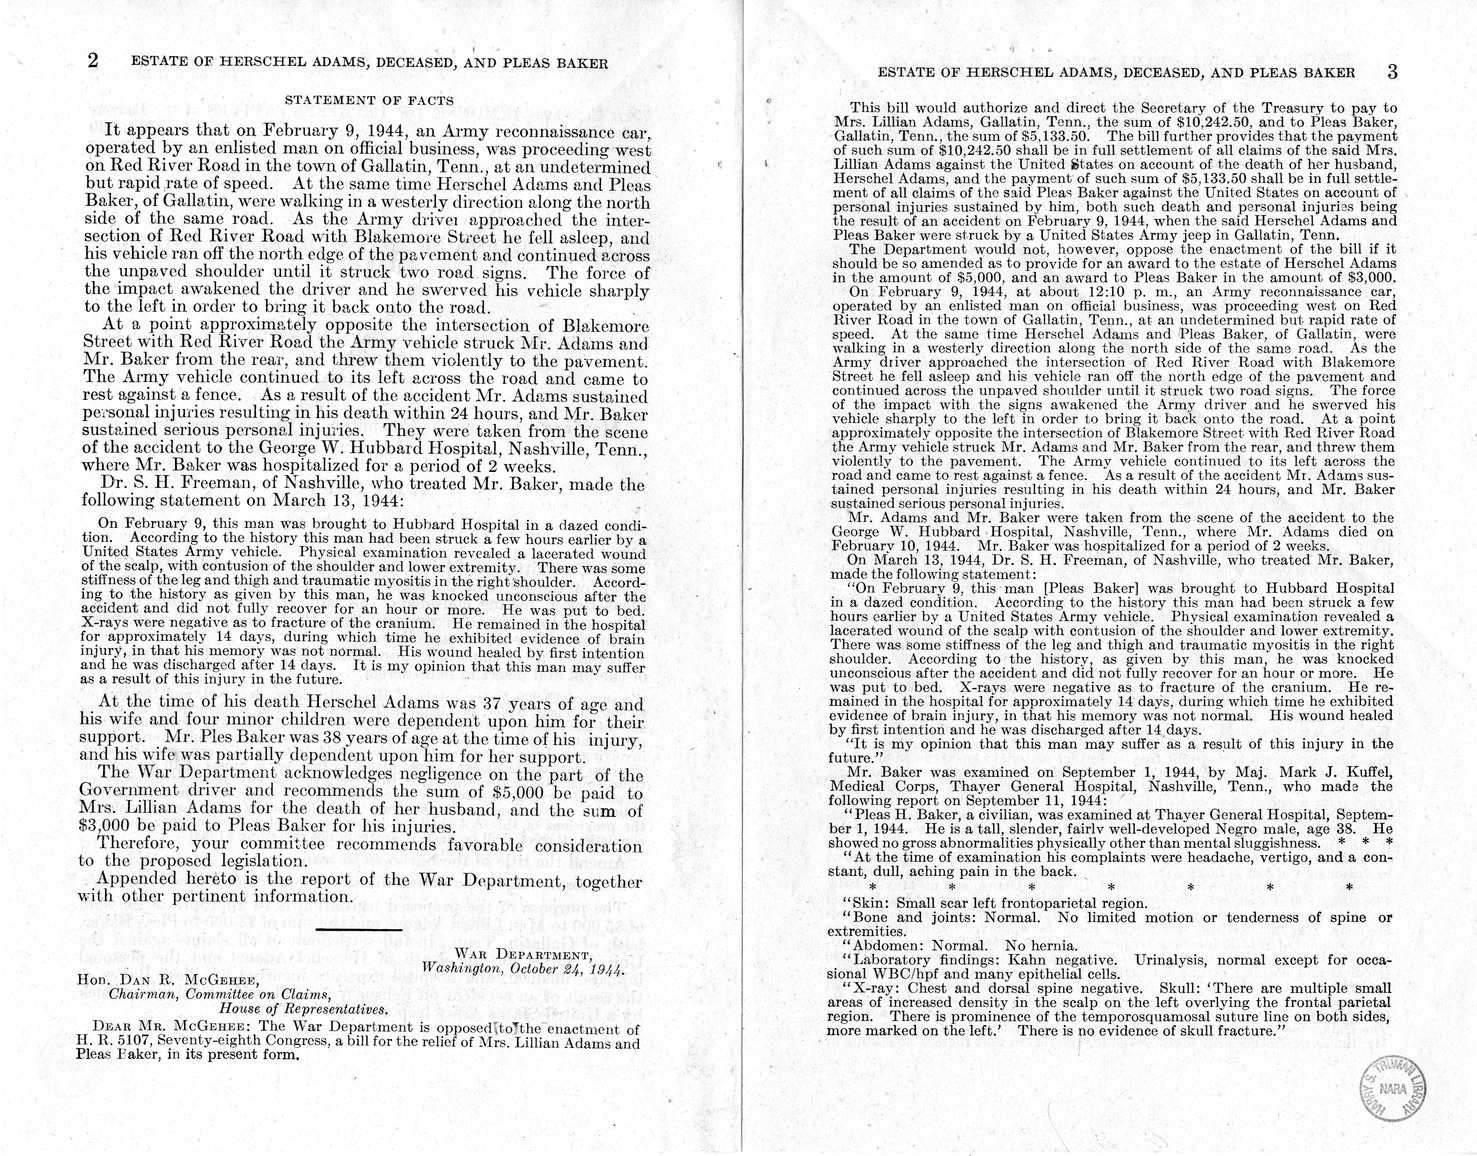 Memorandum from Frederick J. Bailey to M. C. Latta, H.R. 2727, For the Relief of the Estate of Herschel Adams, Deceased, and Pleas Baker, with Attachments